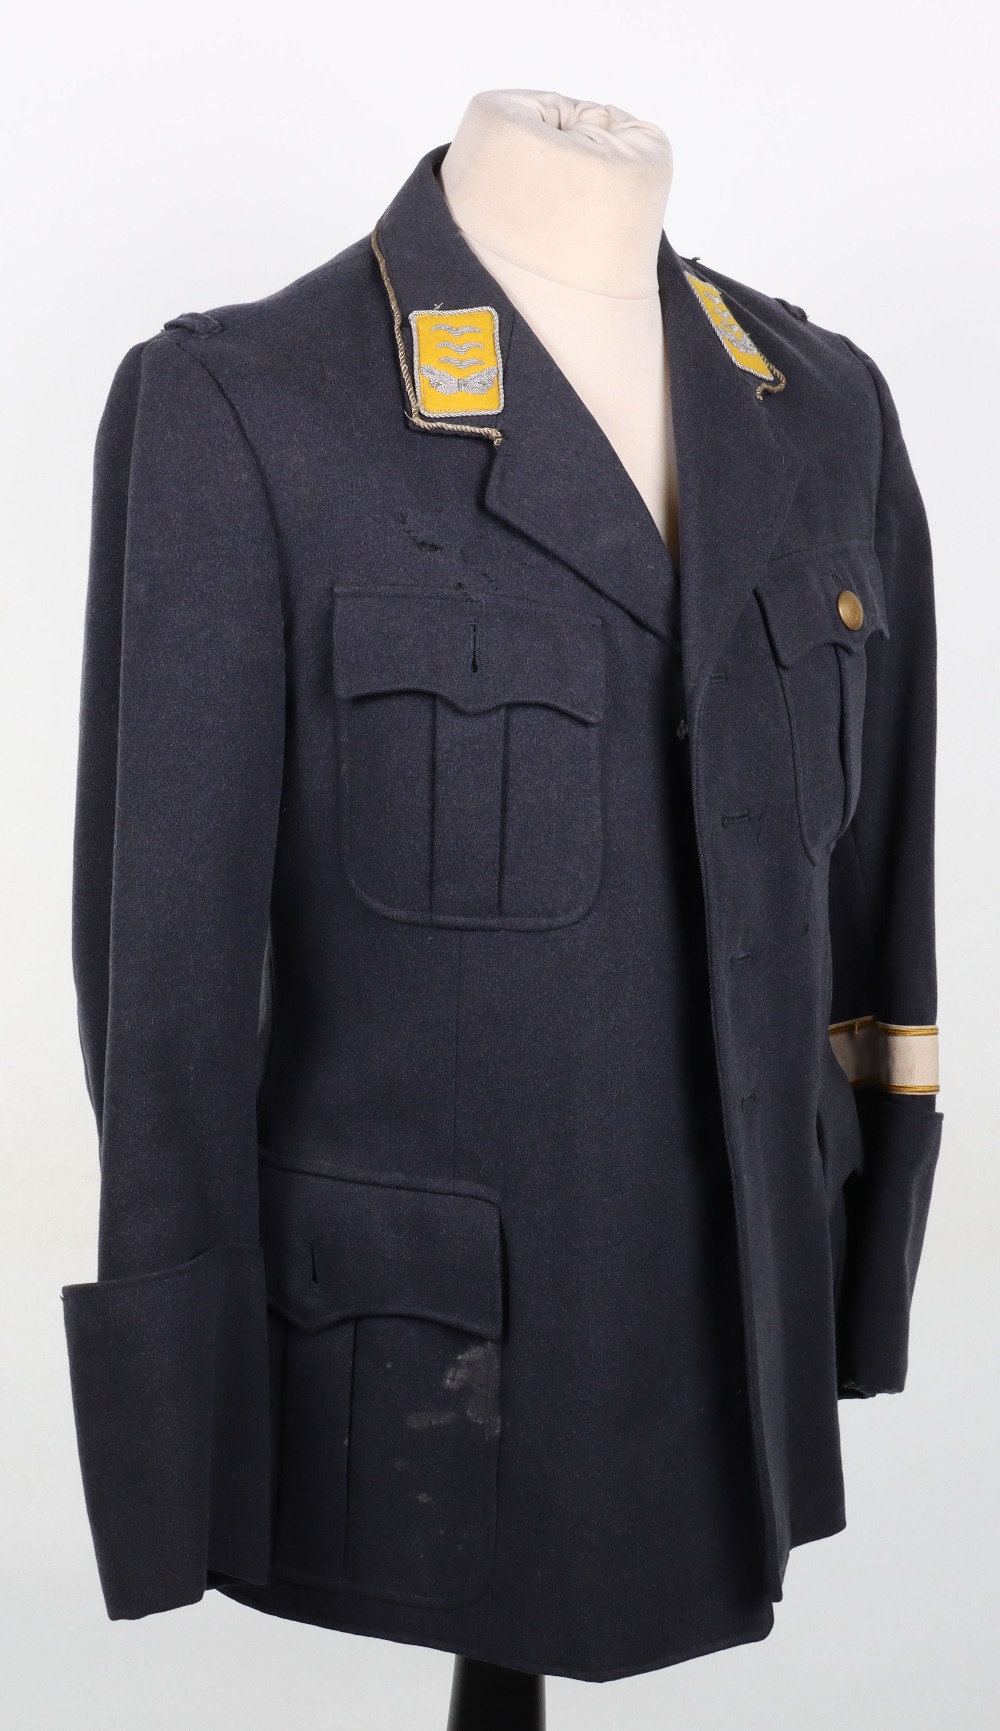 WW2 Style German Luftwaffe Officers Tunic - Image 6 of 8